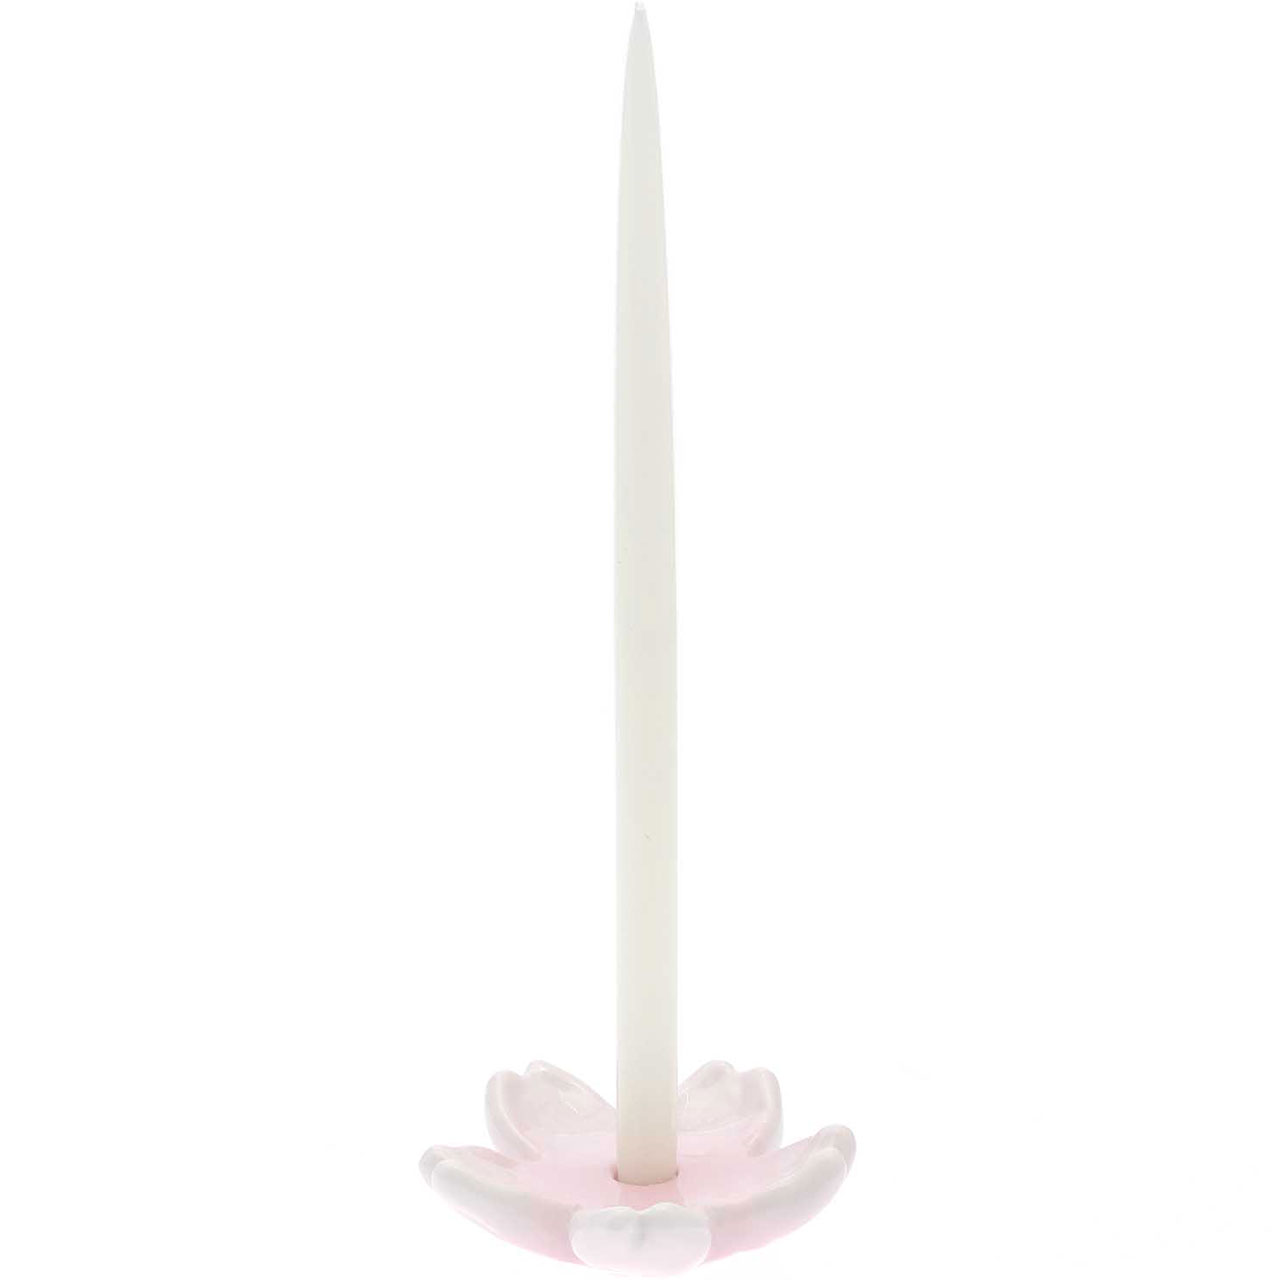 Decorative Candles - Eggshell, Tapered (28cm)